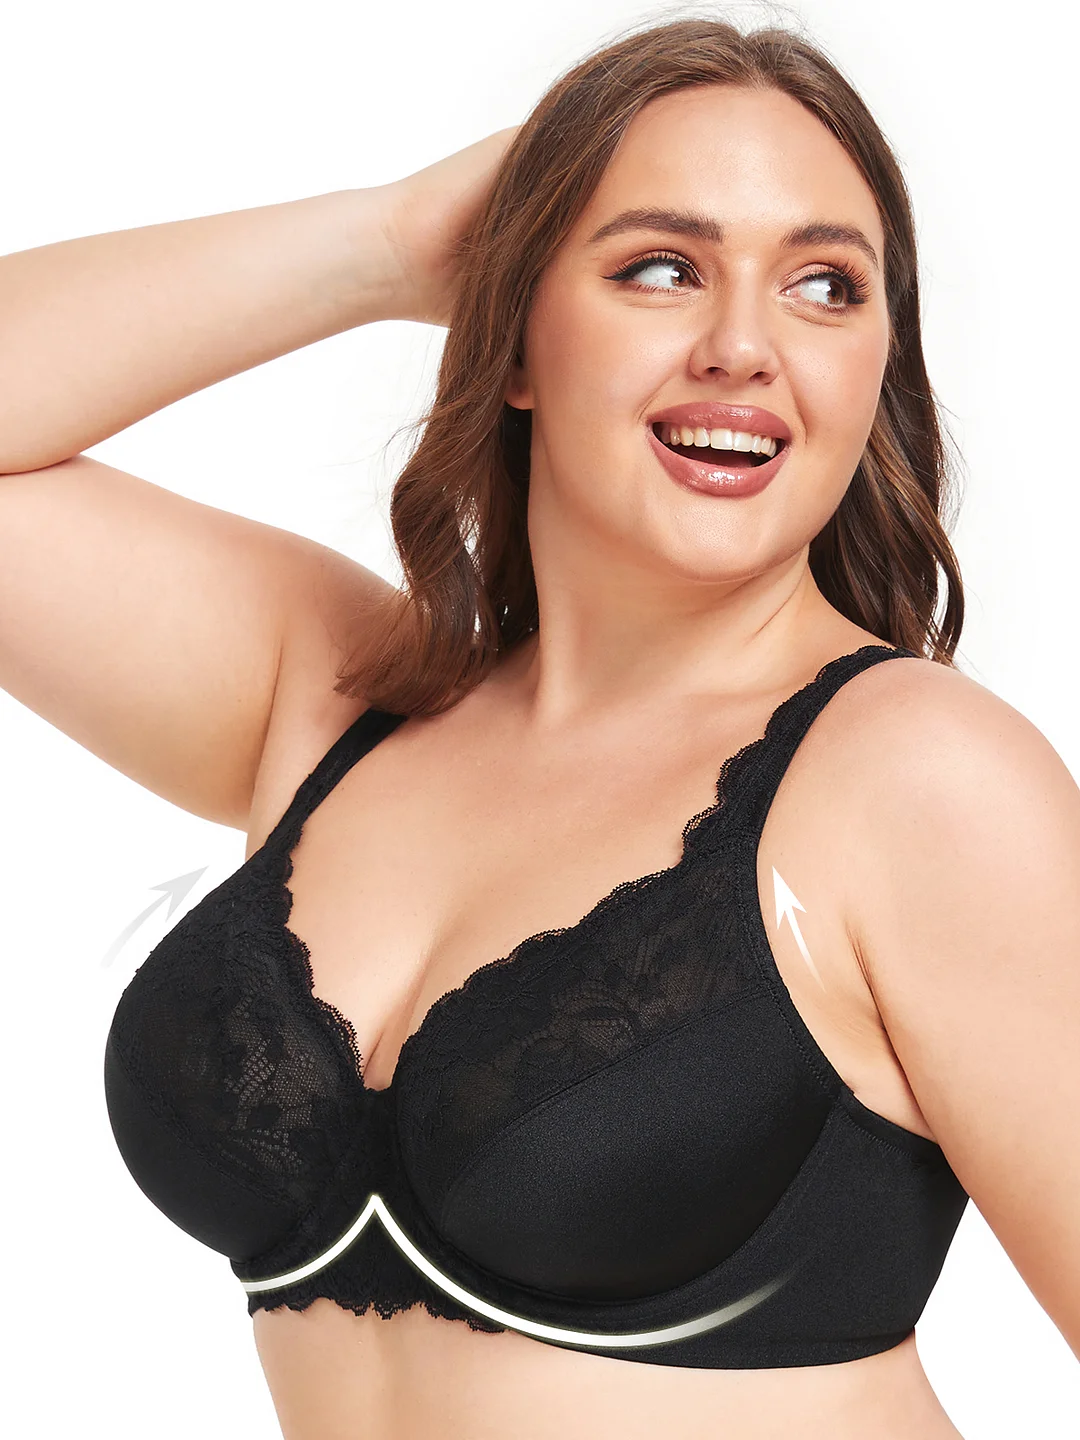 EvesLace Bras for Women, Ultra Lifting Unpaddes Comfortable Bra, Full Coverage Underwire Bras for Everyday Wear